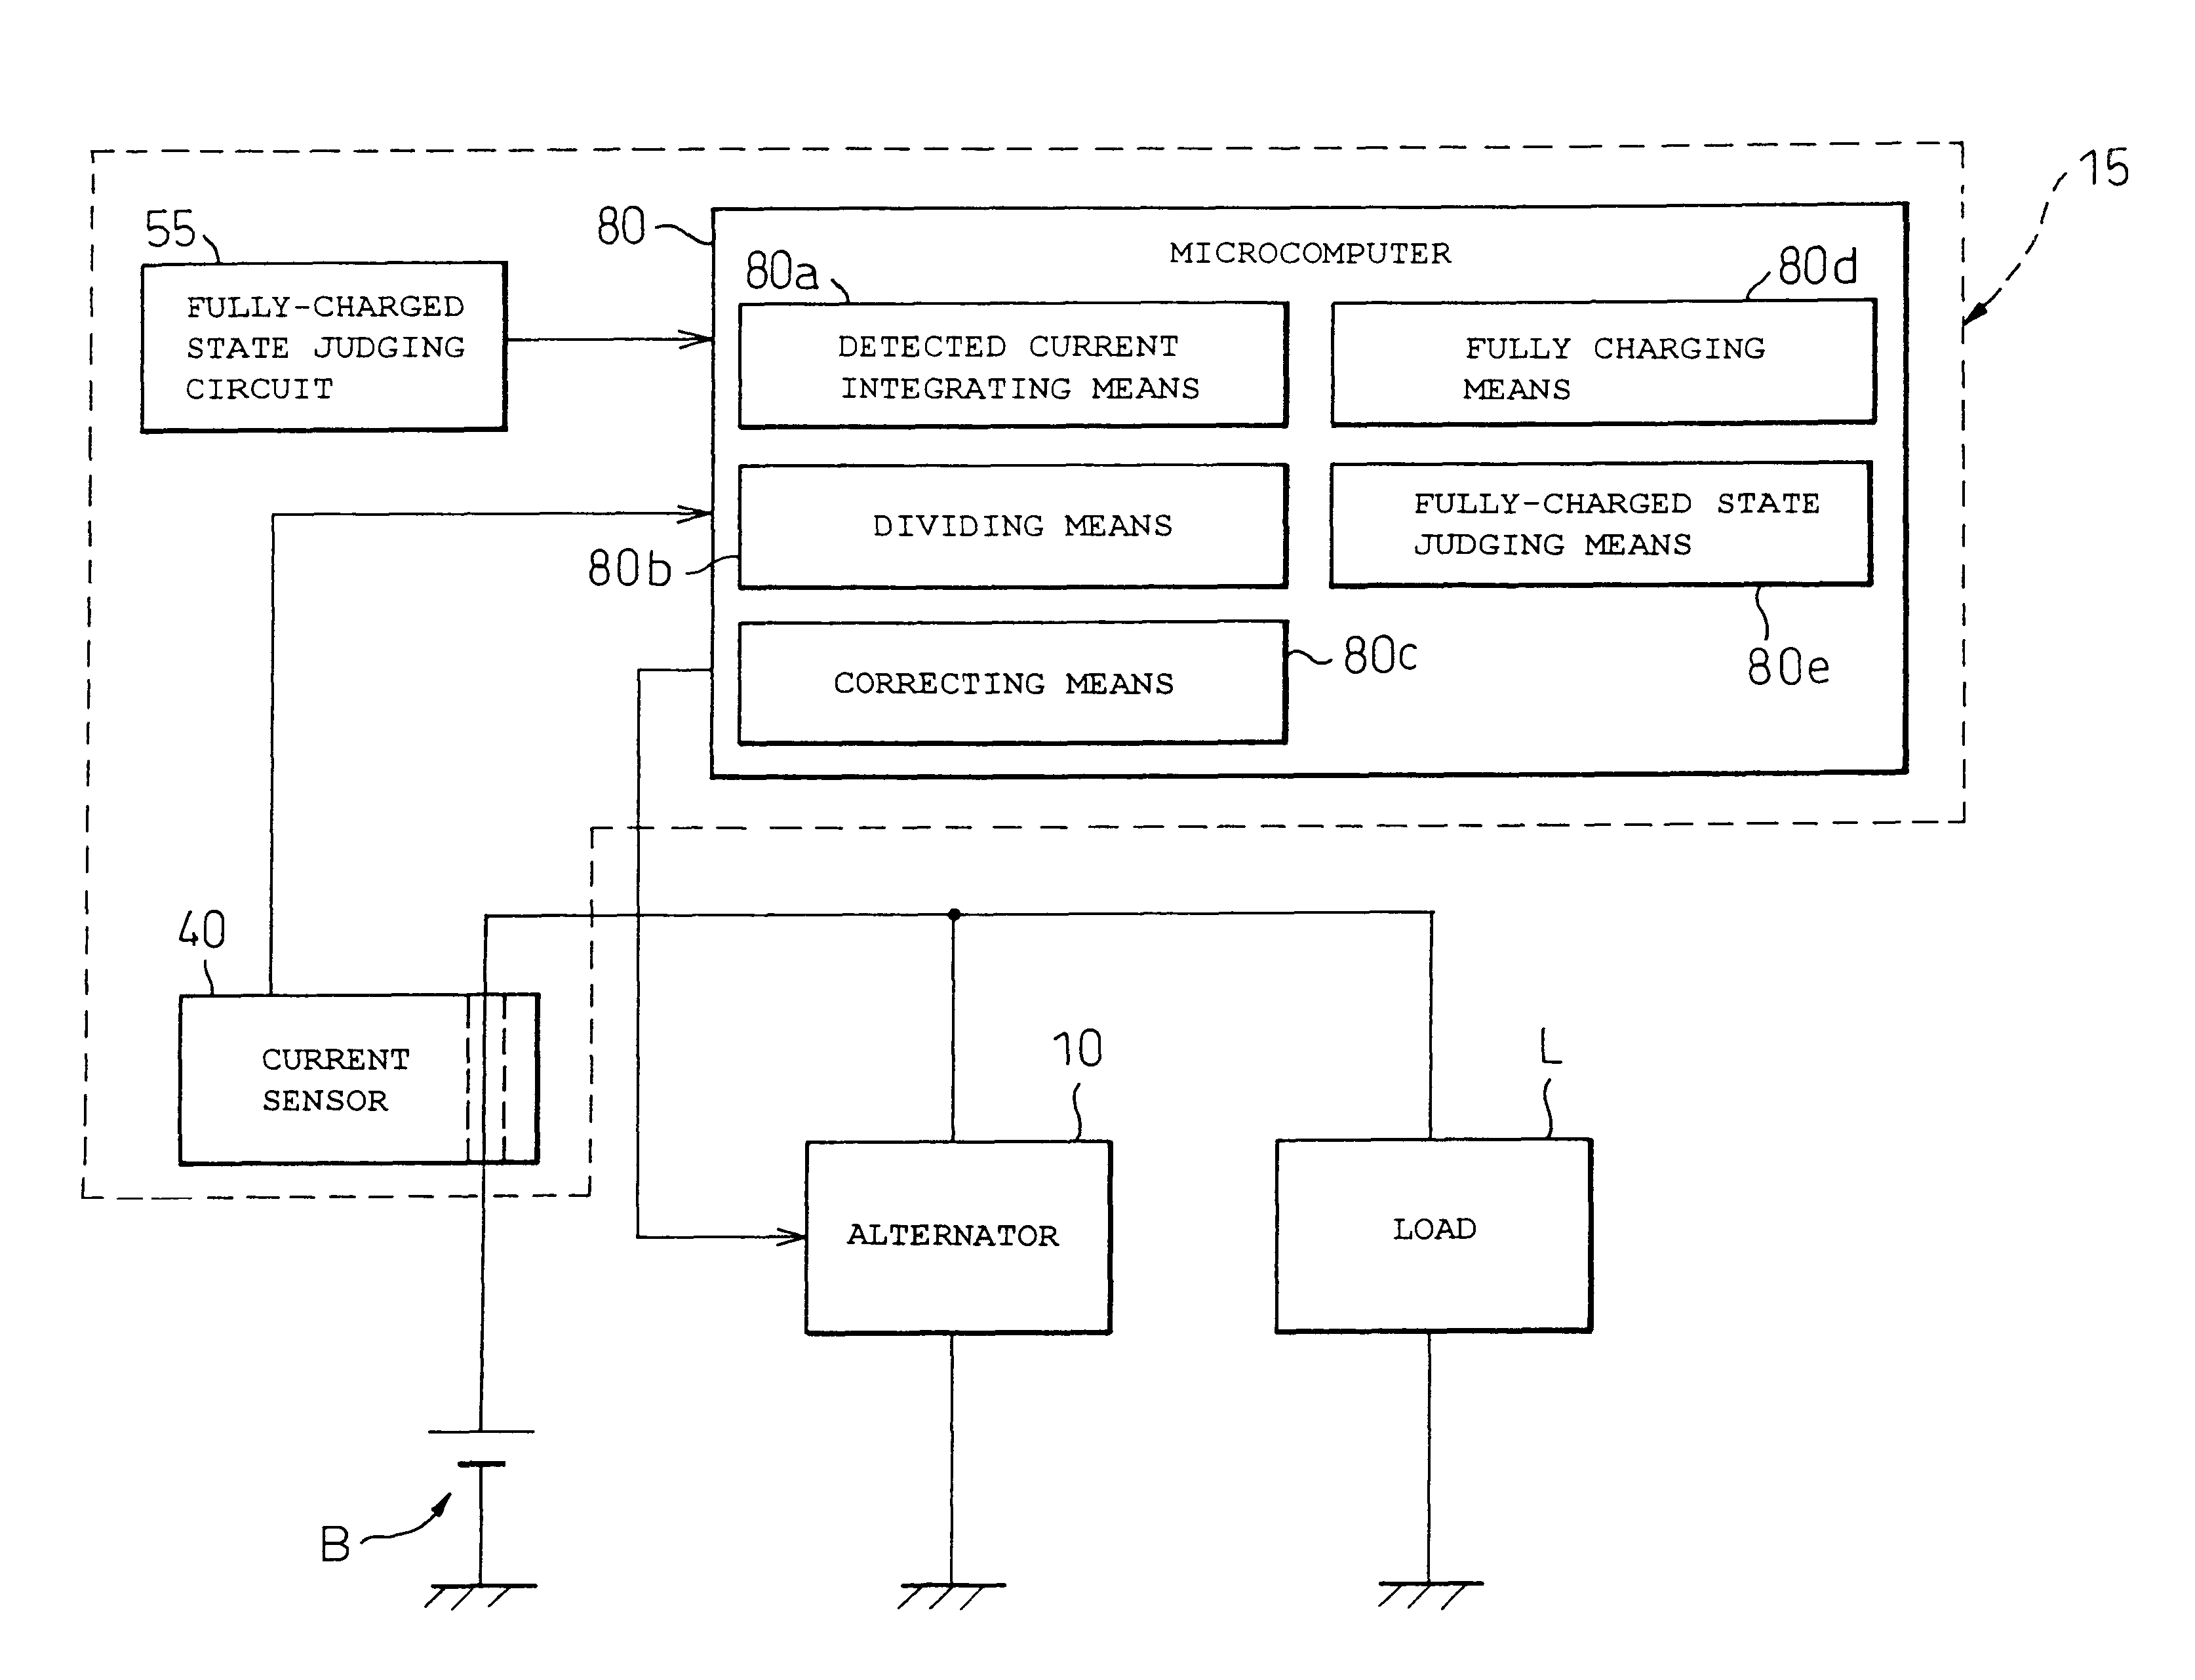 Battery capacity measuring and remaining capacity calculating system